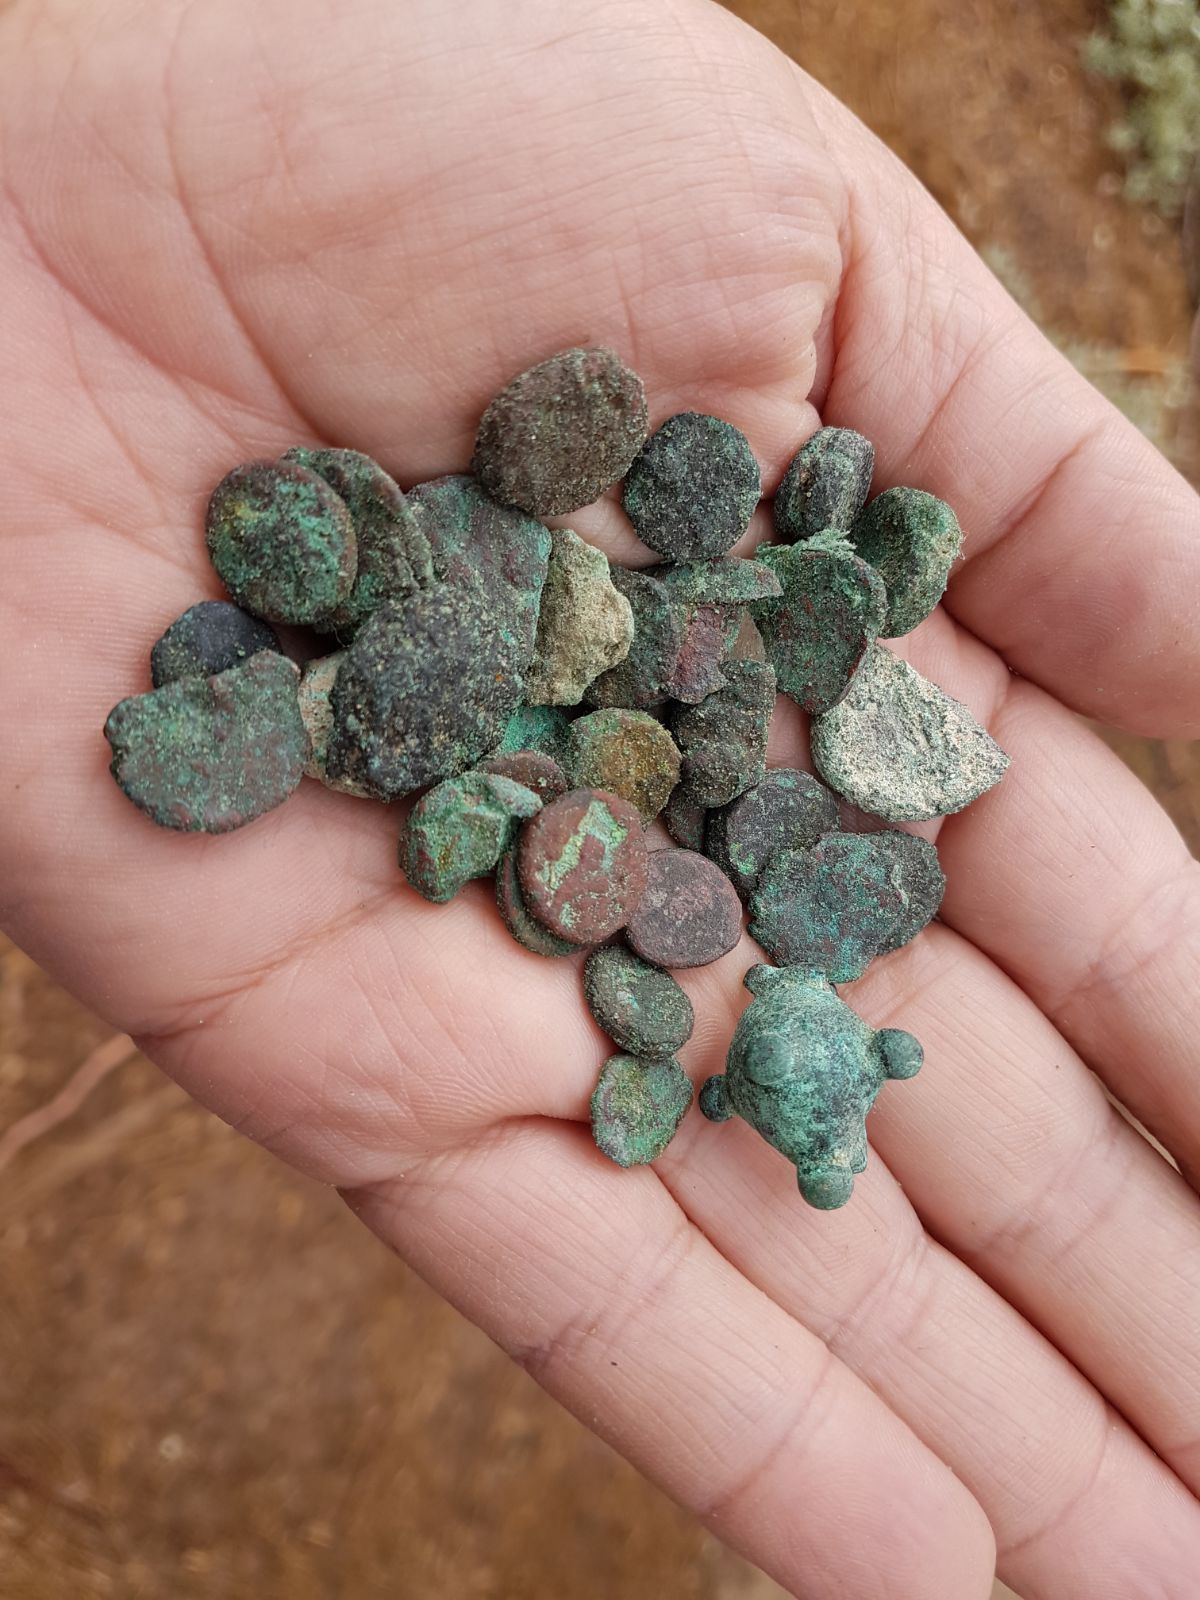 Bronze coins confiscated from the antiquities thief